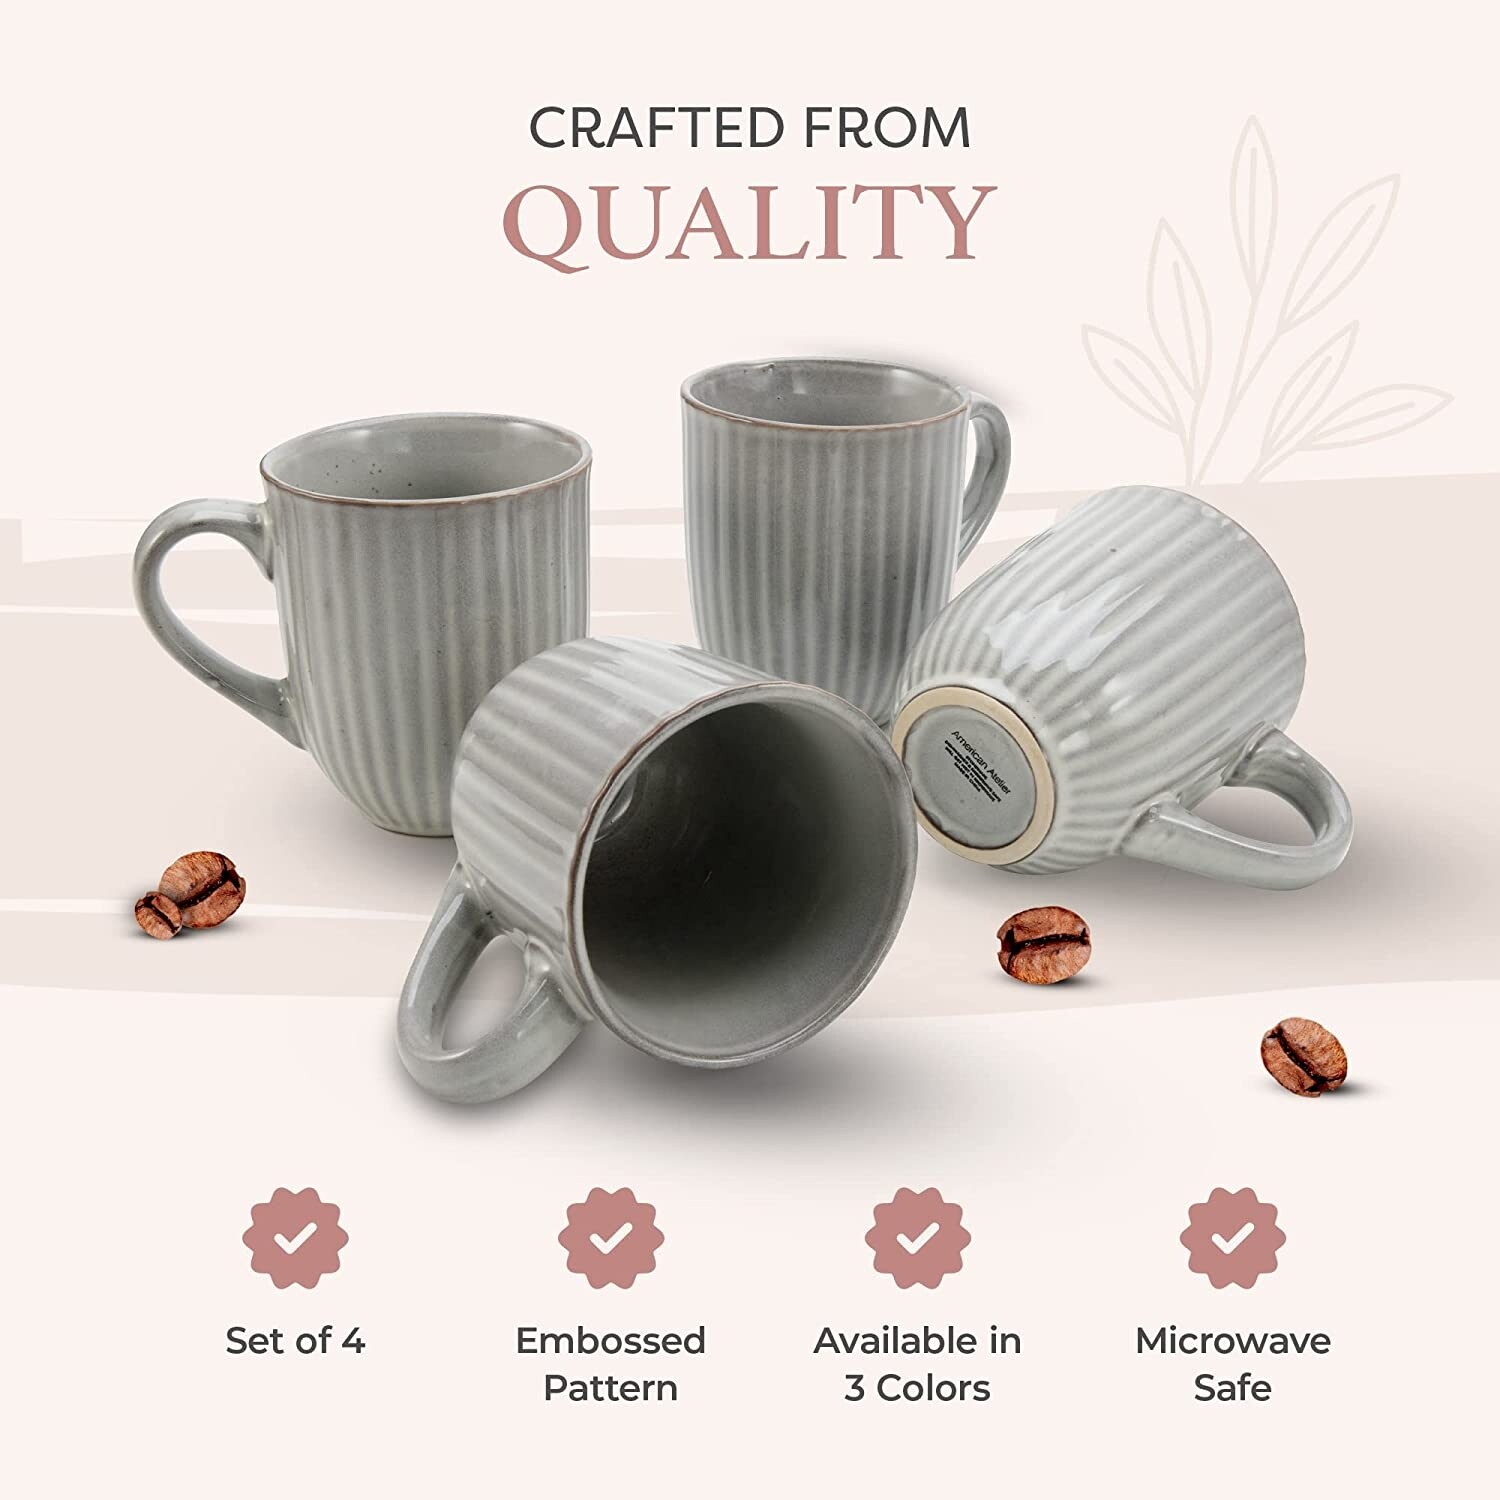 https://ak1.ostkcdn.com/images/products/is/images/direct/81905b0578e8e2ceb41afb4c5a4d0dc900459bf4/American-Atelier-14-oz.-Large-Handle-Coffee-Mug%2C-Set-of-4.jpg